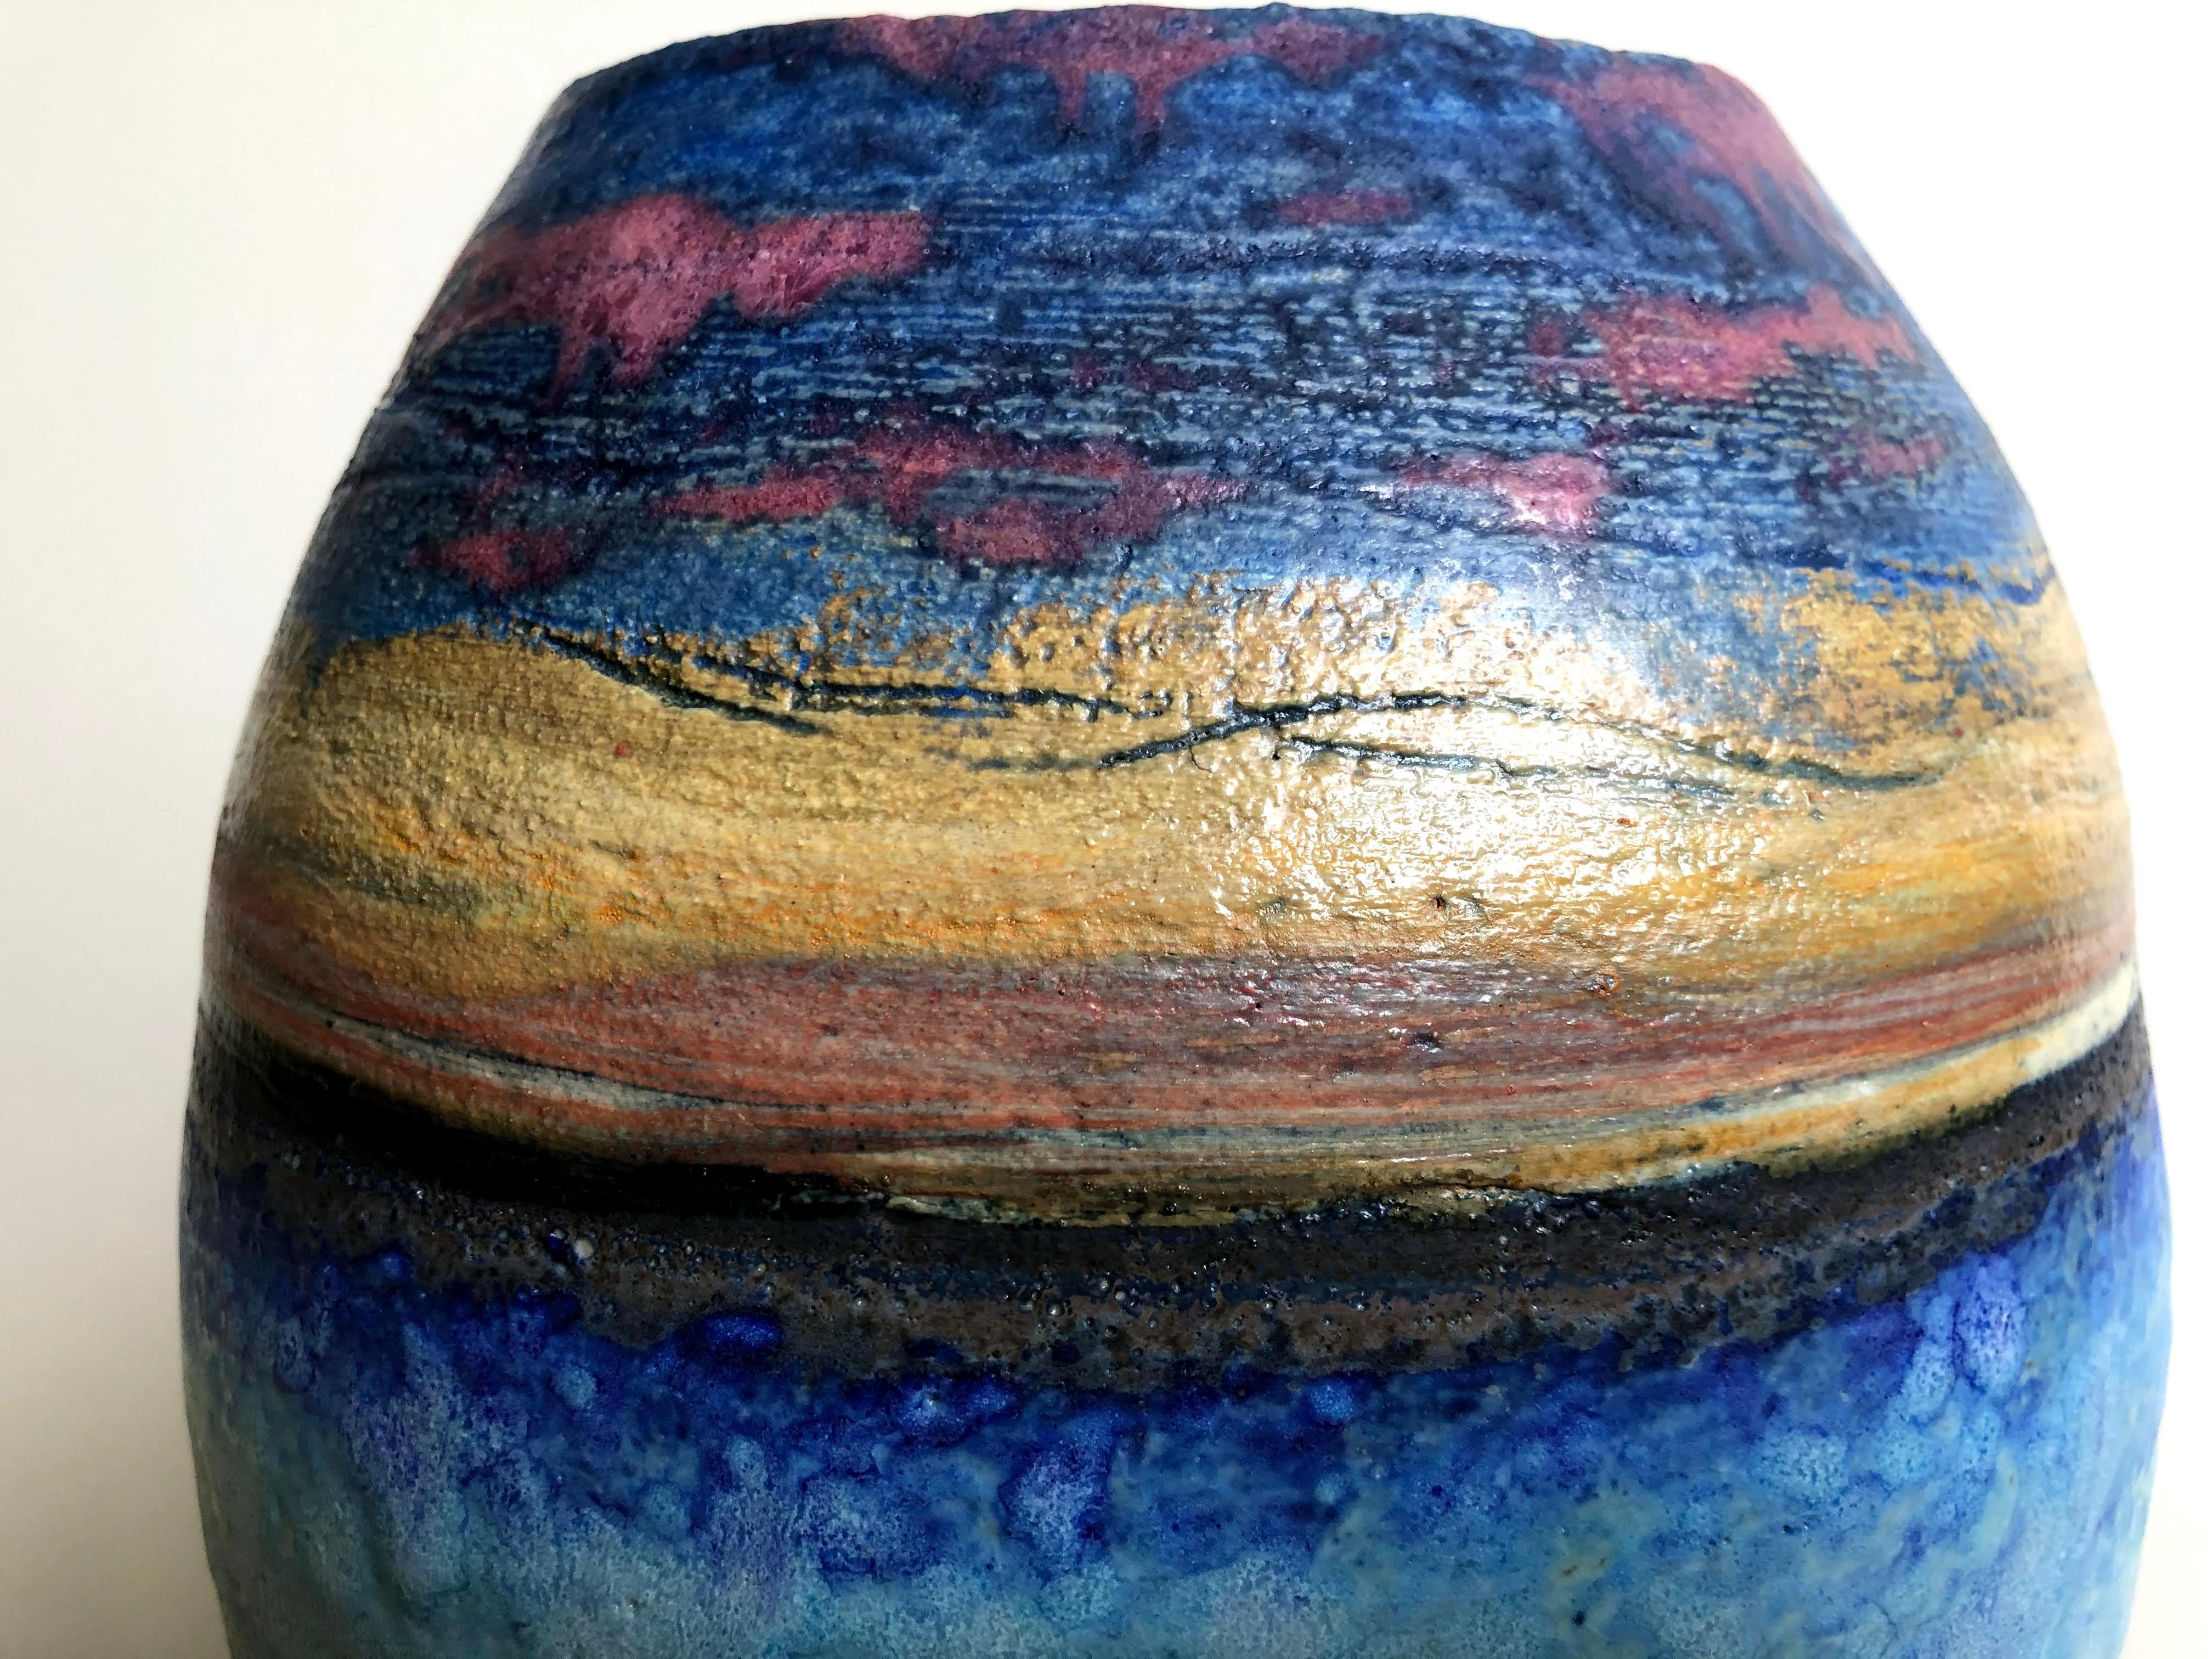 A Large Minoan style vessel inspired by the views, constantly changing light and rugged beauty of the Atlantic Ocean and coastal moorland of West Cornwall. Individually hand thrown by sculptor and ceramicist Colin Caffell who experiments with